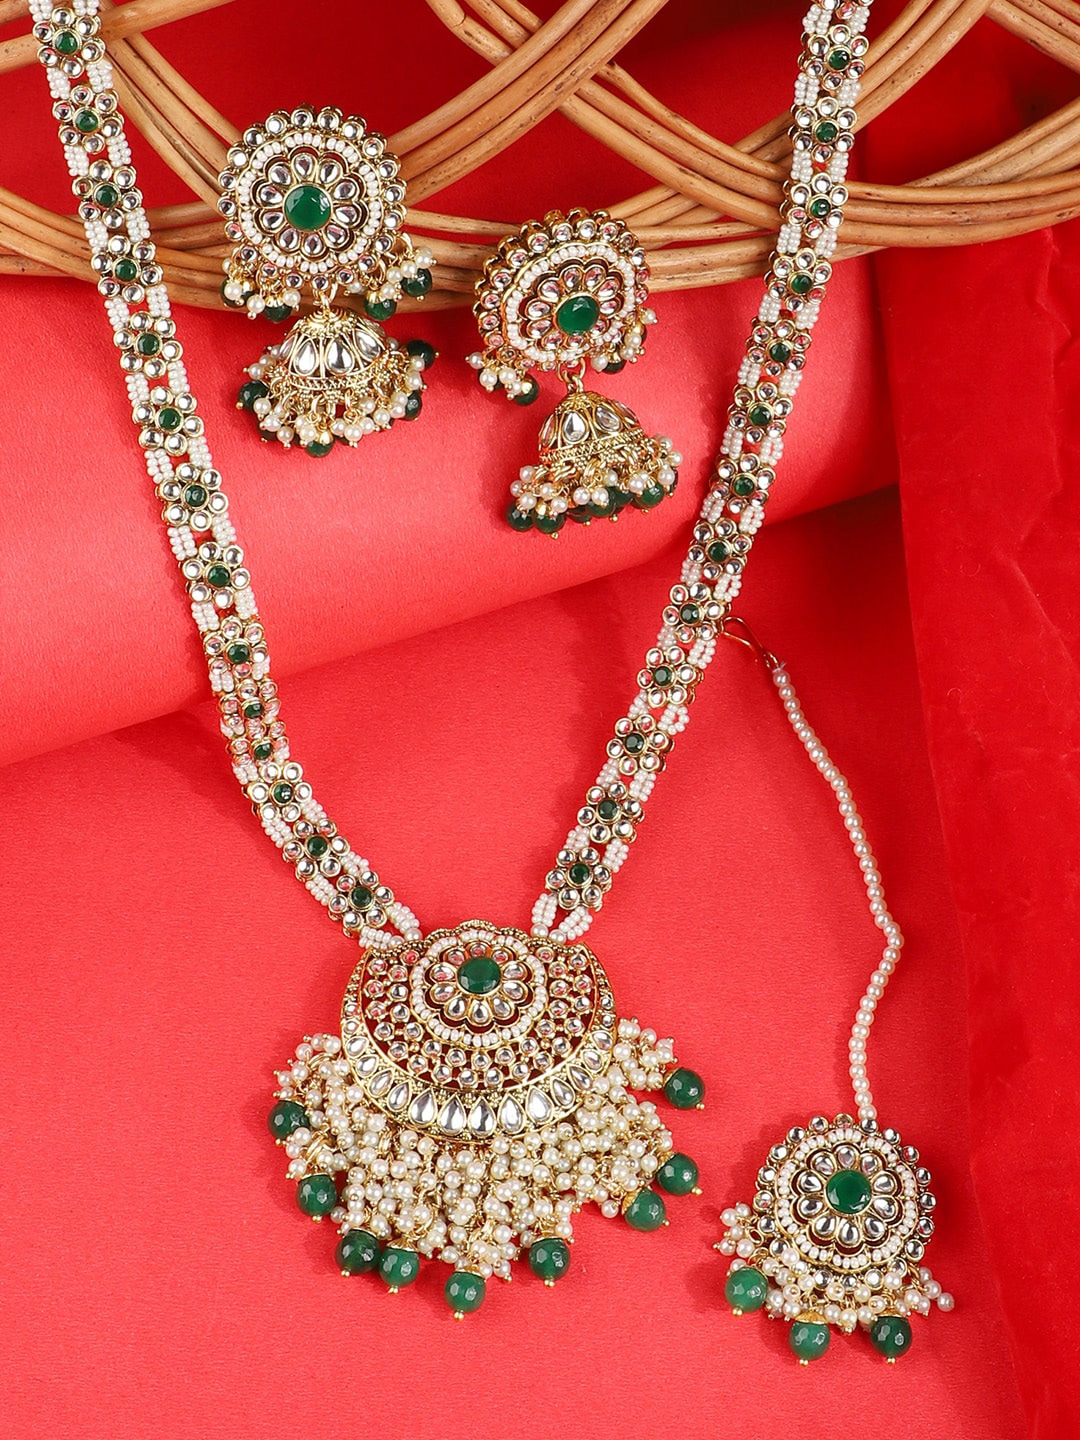 Gold Plated Kundan Necklace Green Tanjore Beads Indian Bridal Jewelry Set |  eBay